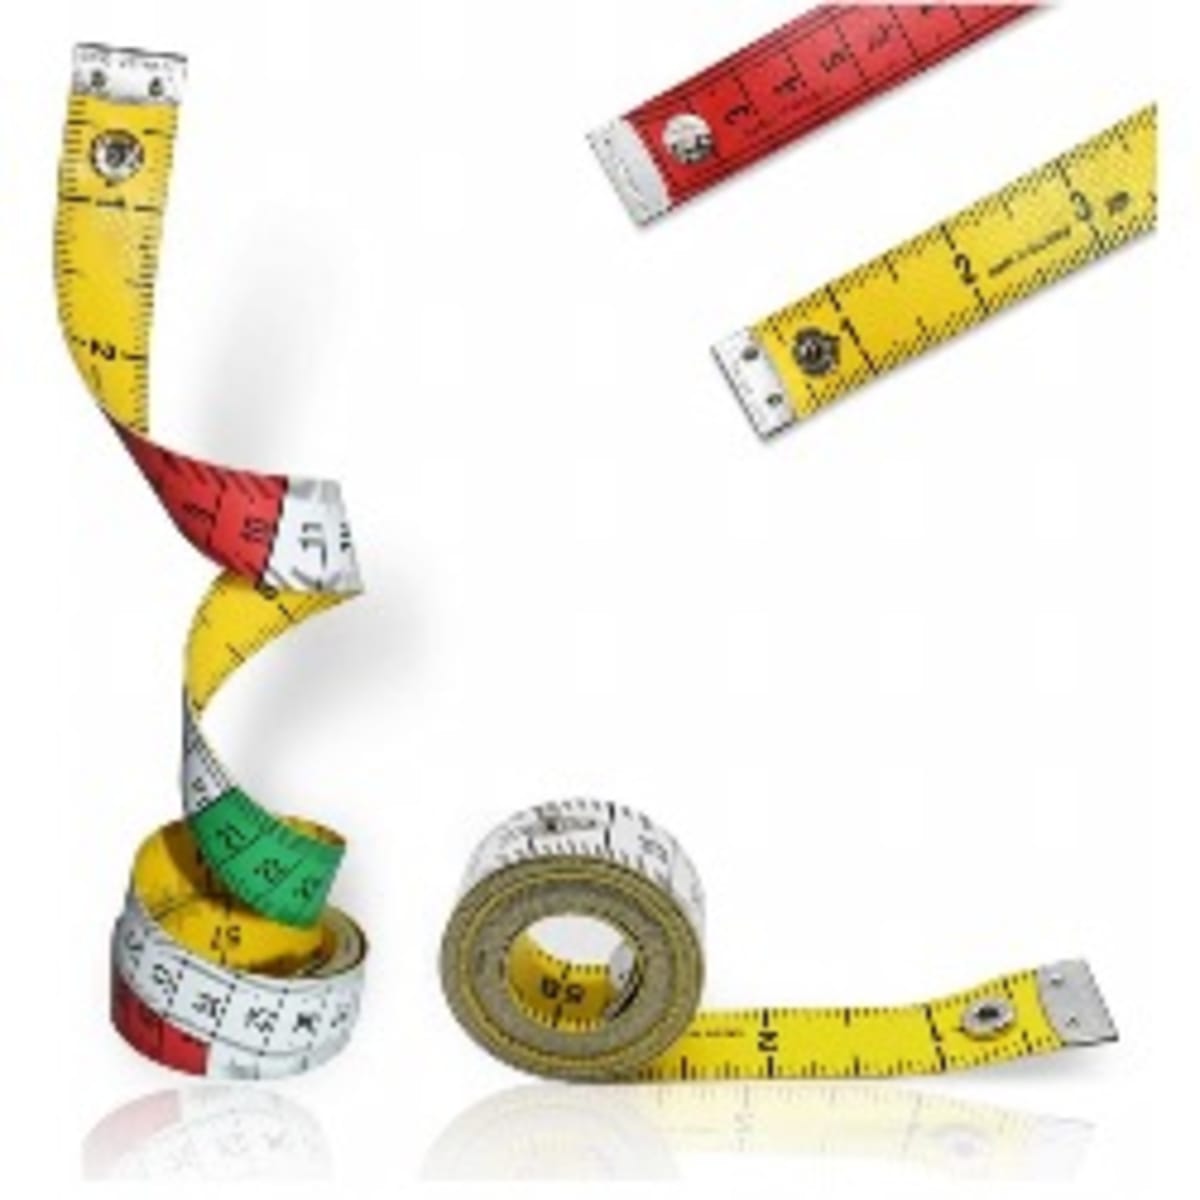 Self Adhesive Measuring Tape / Ruler - 60 inches